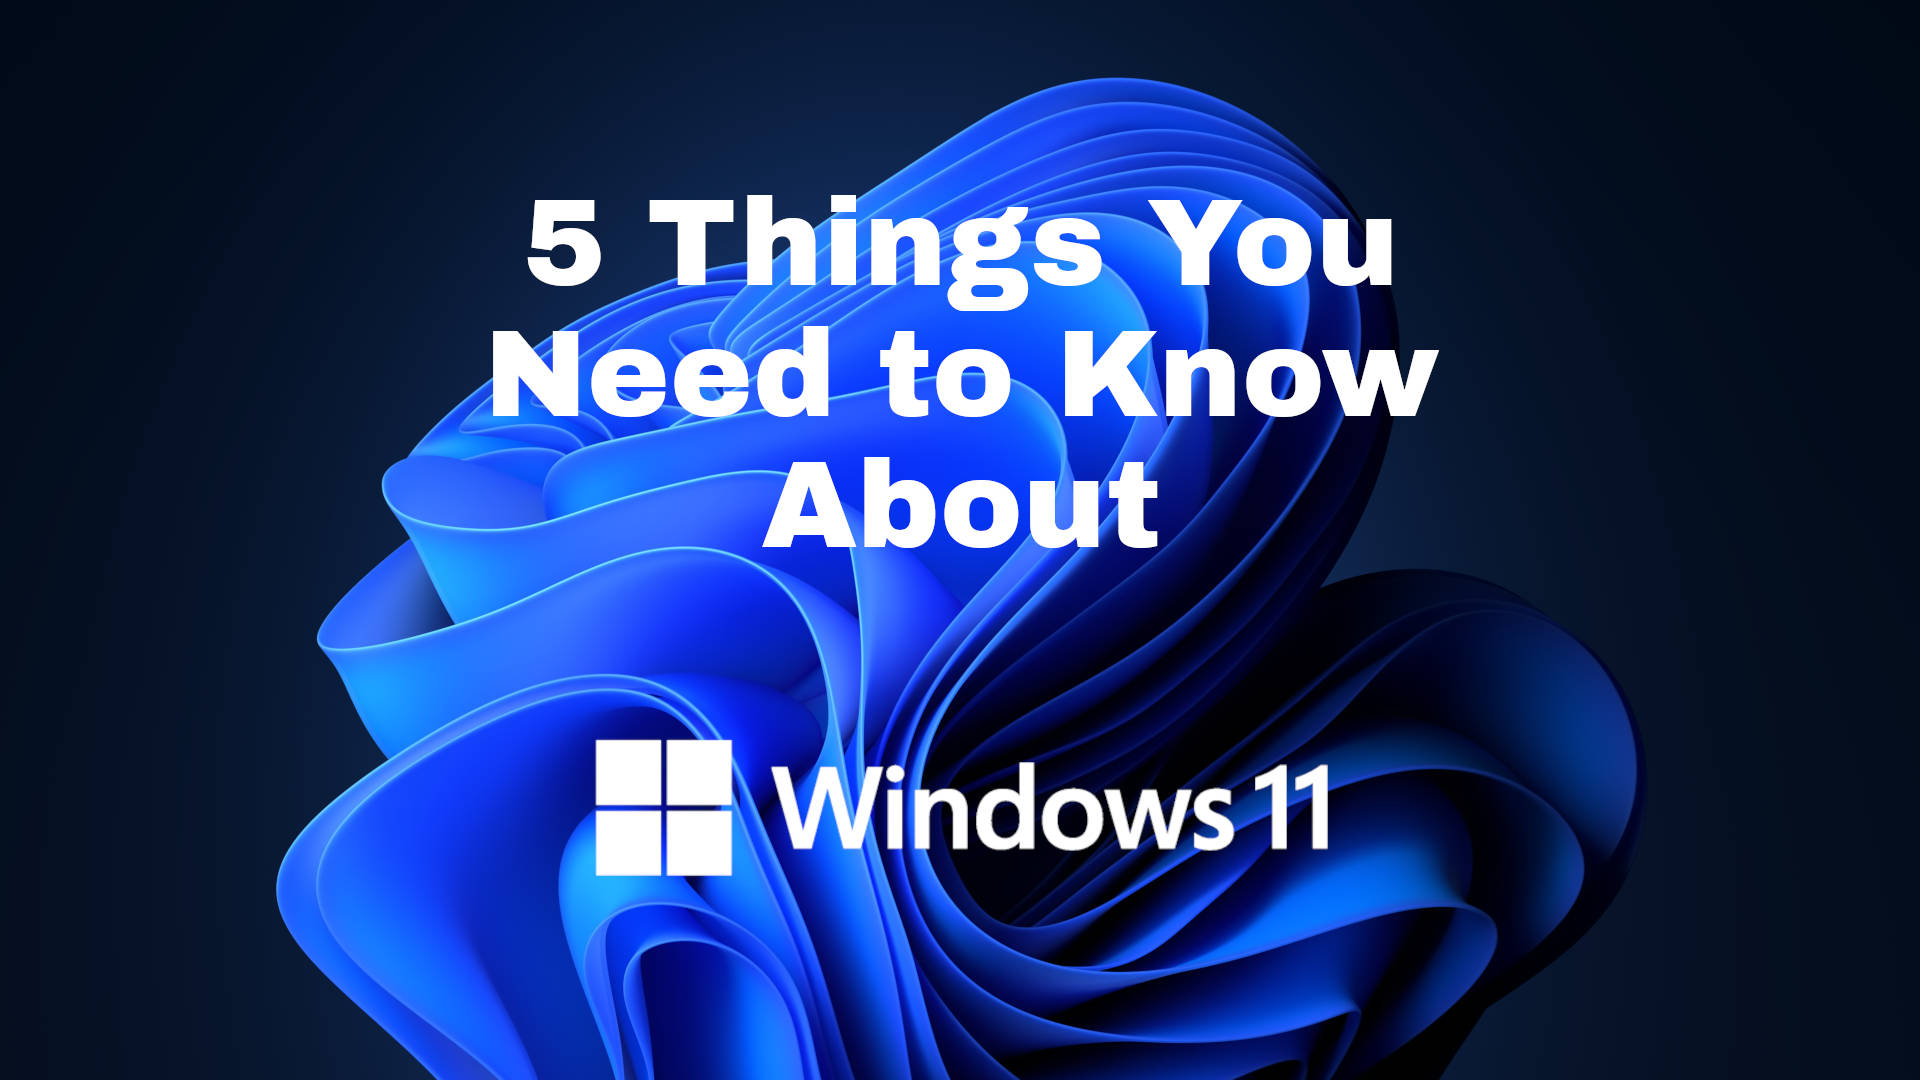 5 Things You Need to Know About Windows 11